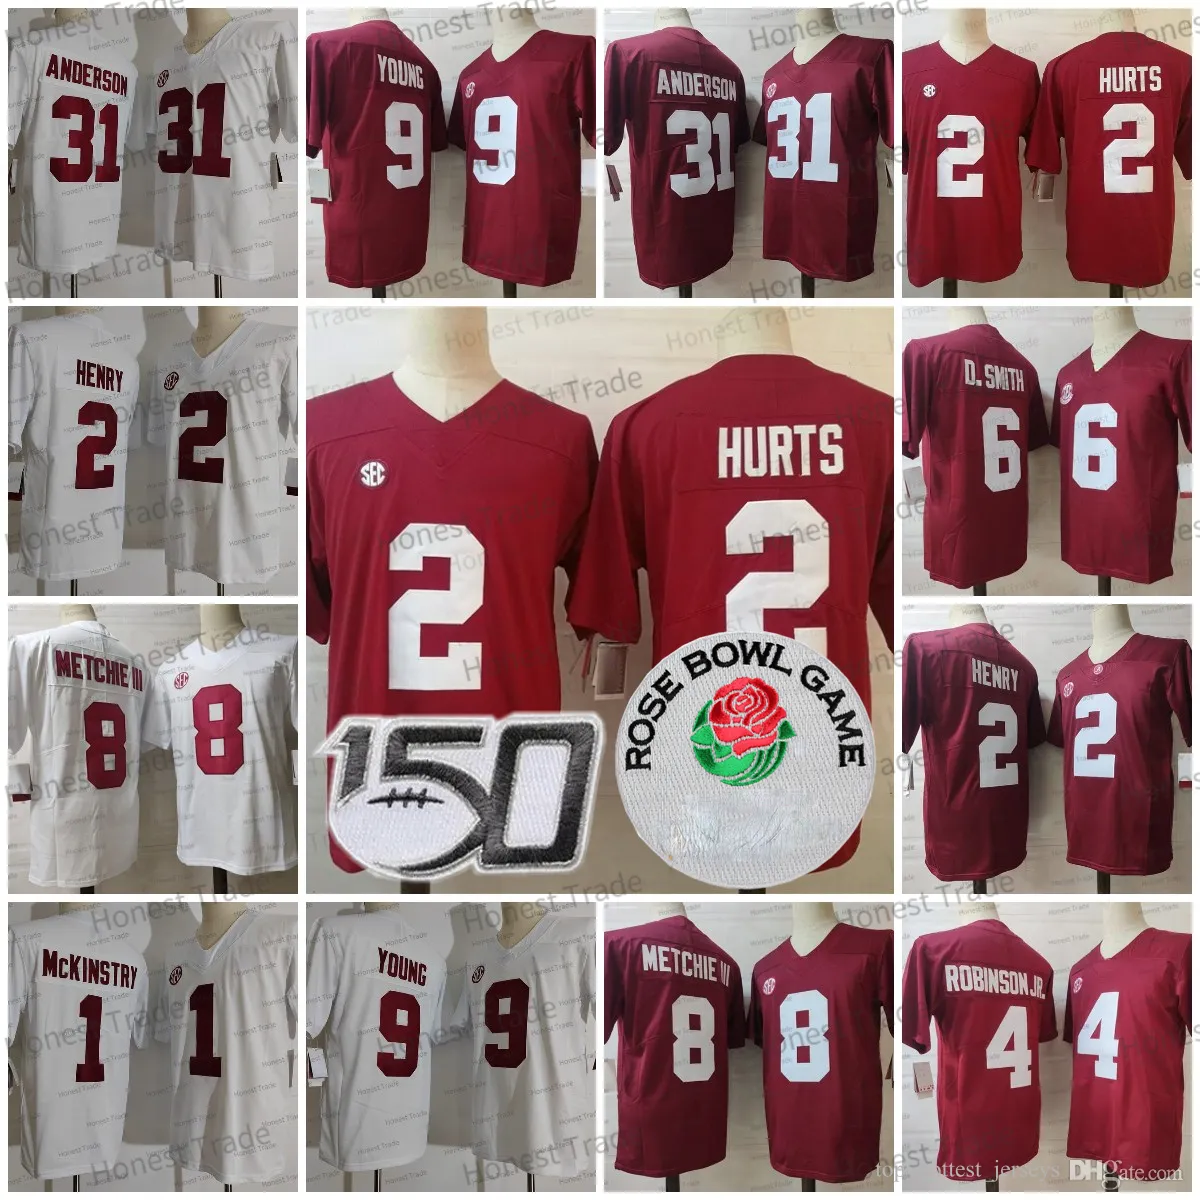 Voetbalshirts NCAA 31 Anderson Jersey 9 Young Hurts 2 Derrick Henry 1 McKinstry 8 John Metchie III 4 Robinson JR. Rood Wit Alabama Karmozijnrood